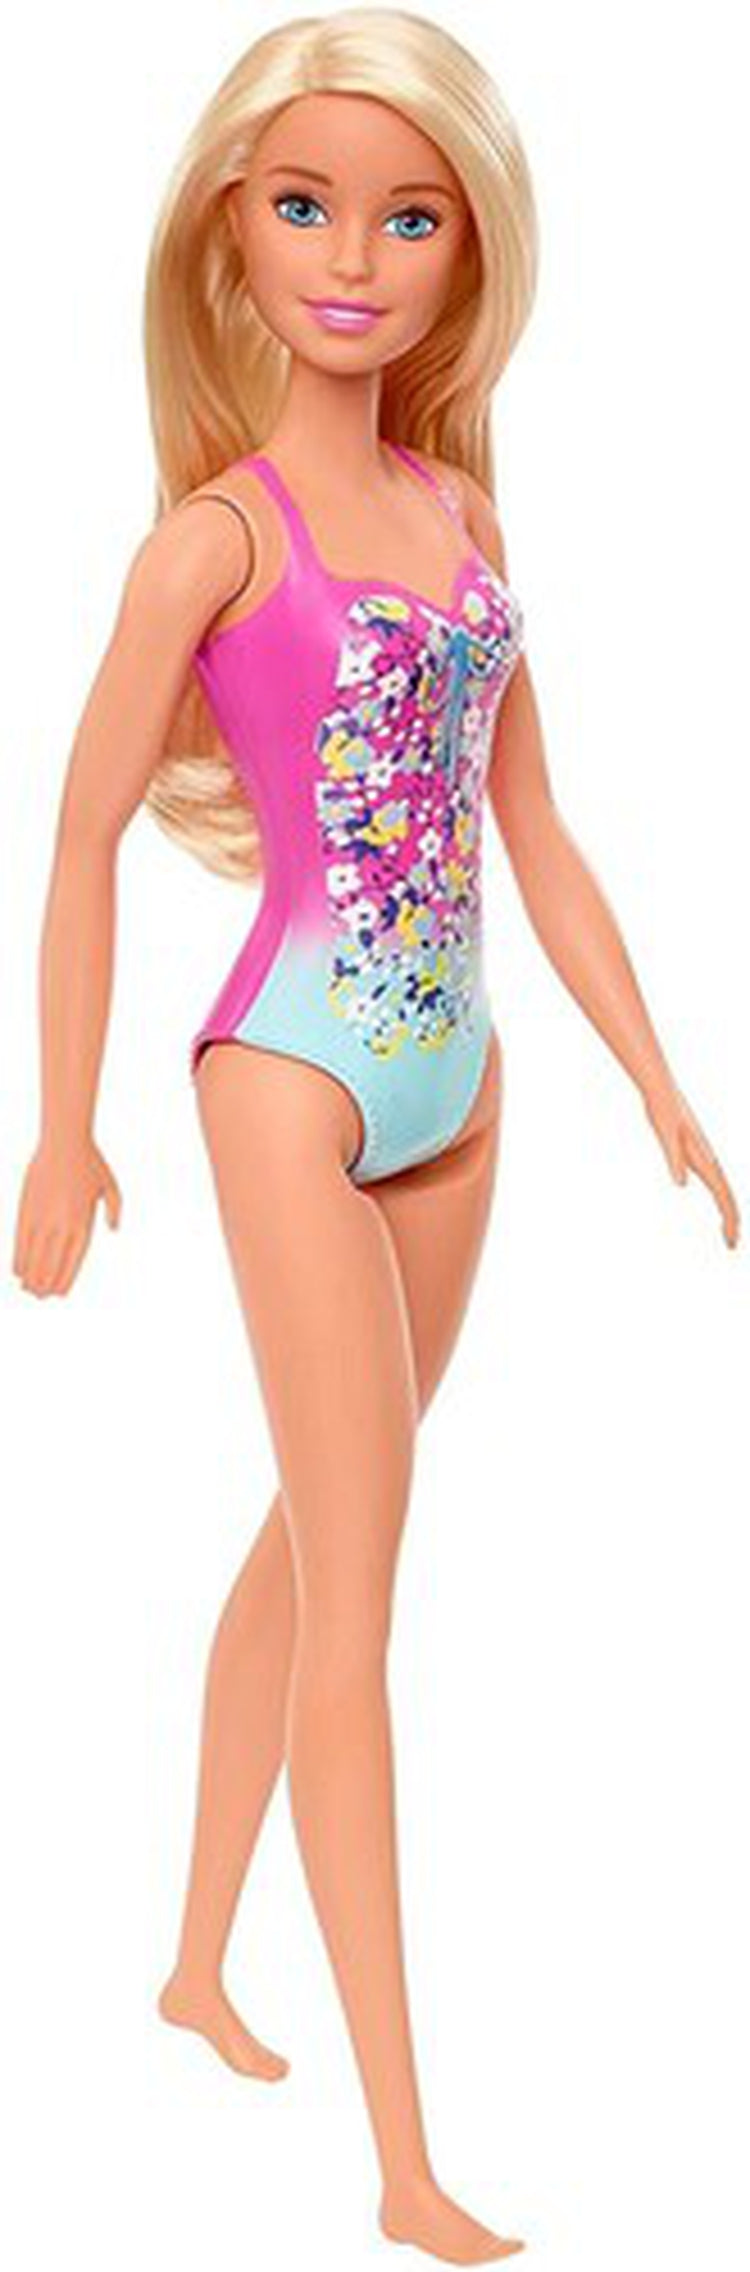 Mattel - Barbie Beach: Doll with Pink, Blue and Floral Design Swim Suit, Blonde